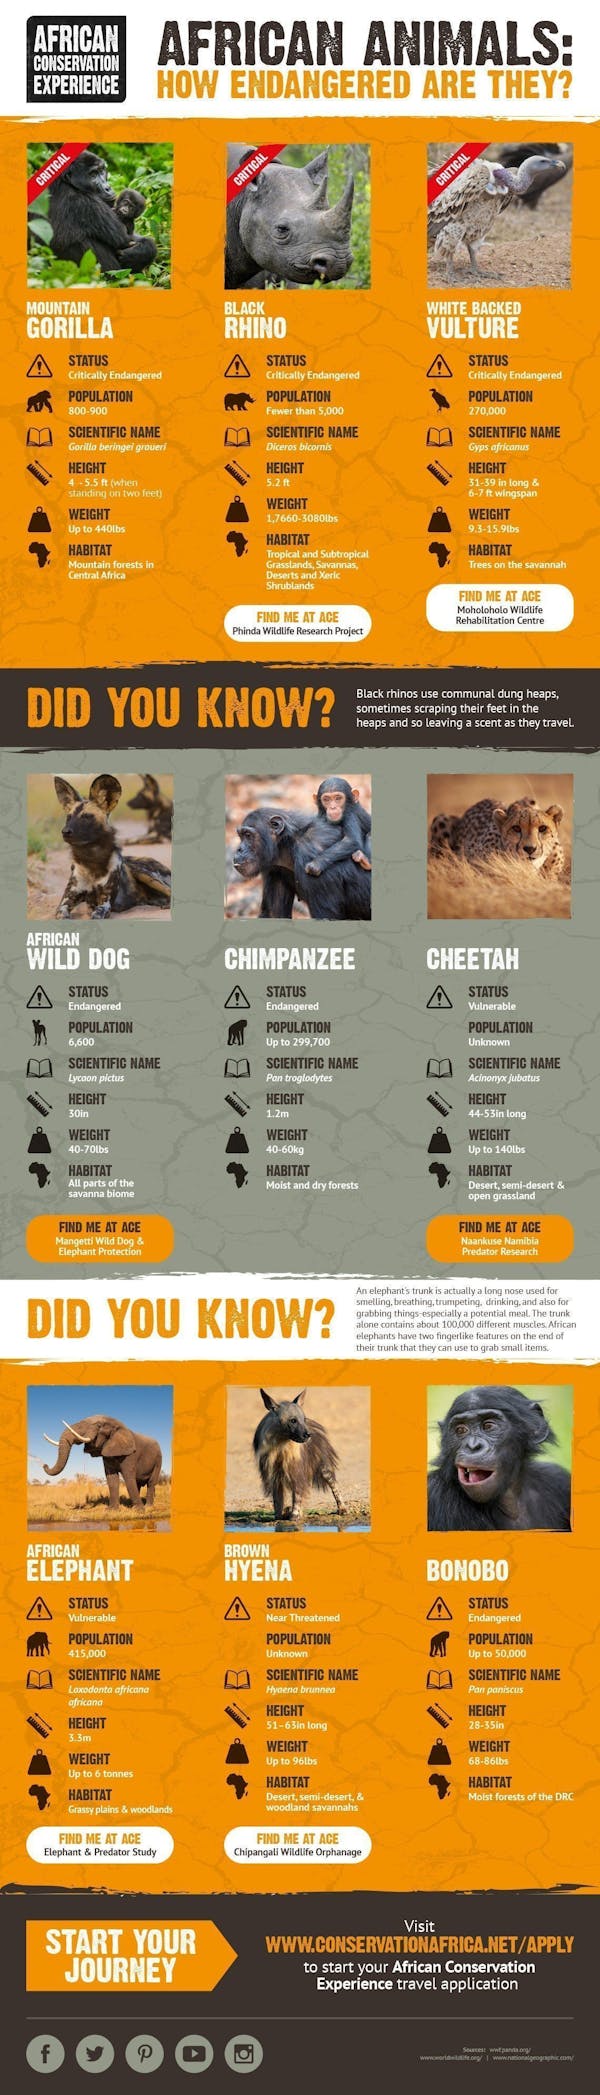 African Animals: How Endangered Are They? Infographic.